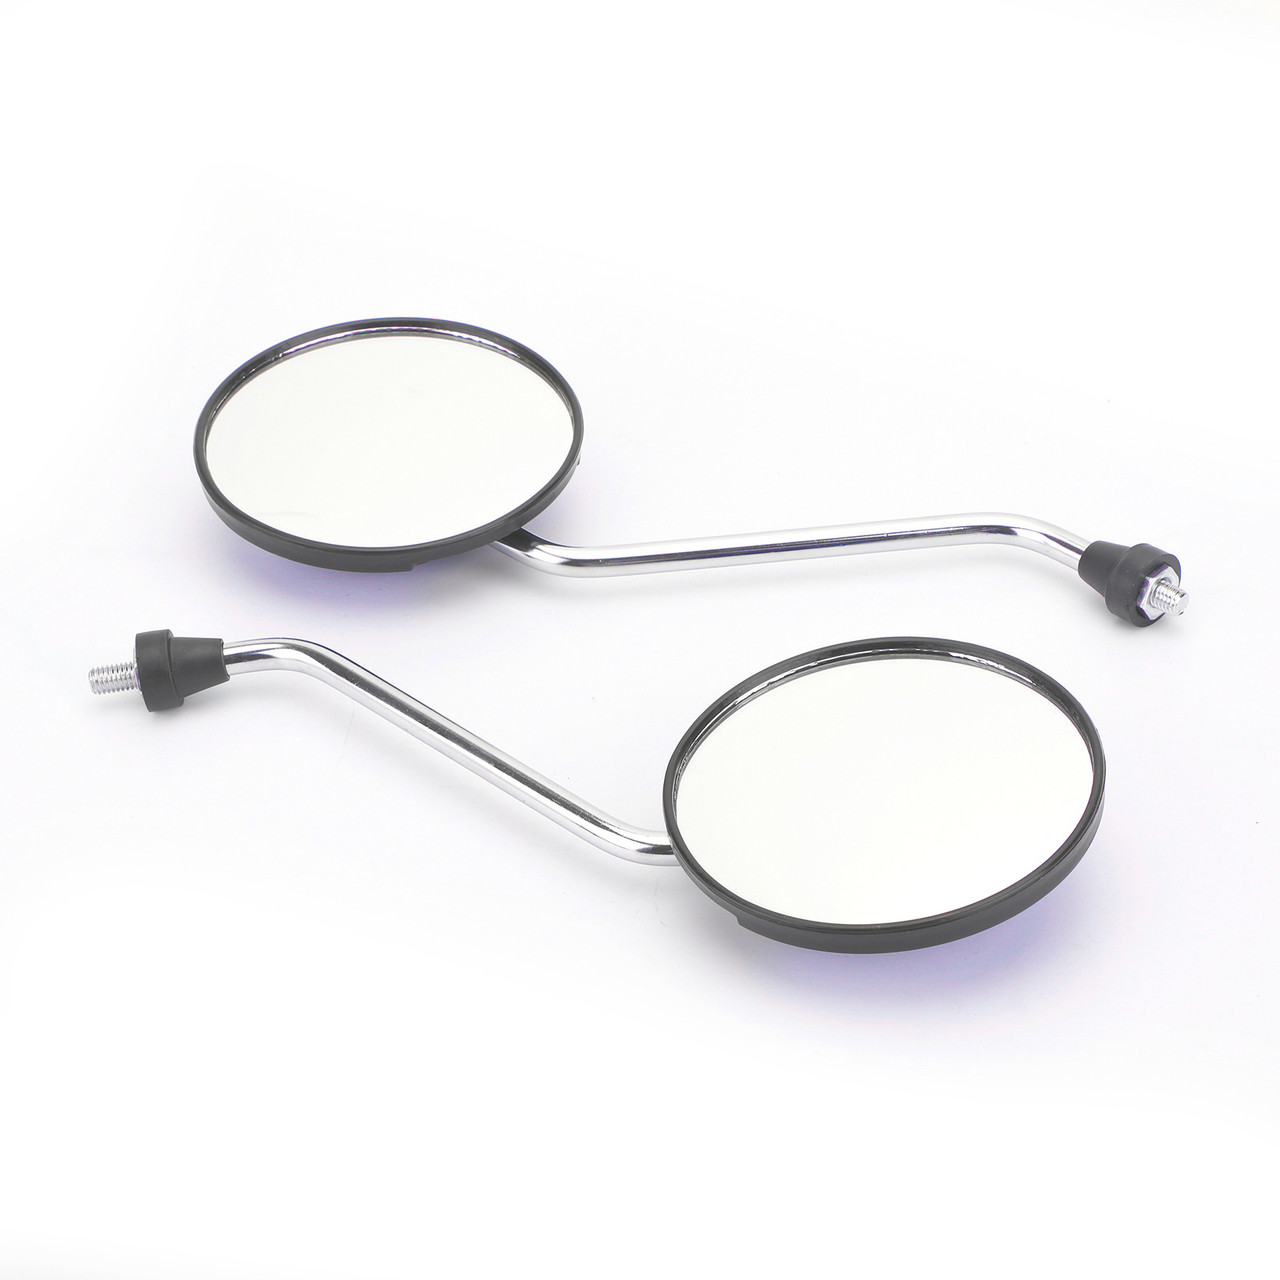 Pair 8mm Rearview Mirrors fits For Kawasaki Scooter Motorcycle Moped Bike ATV with 8MM threads Blue~BC3